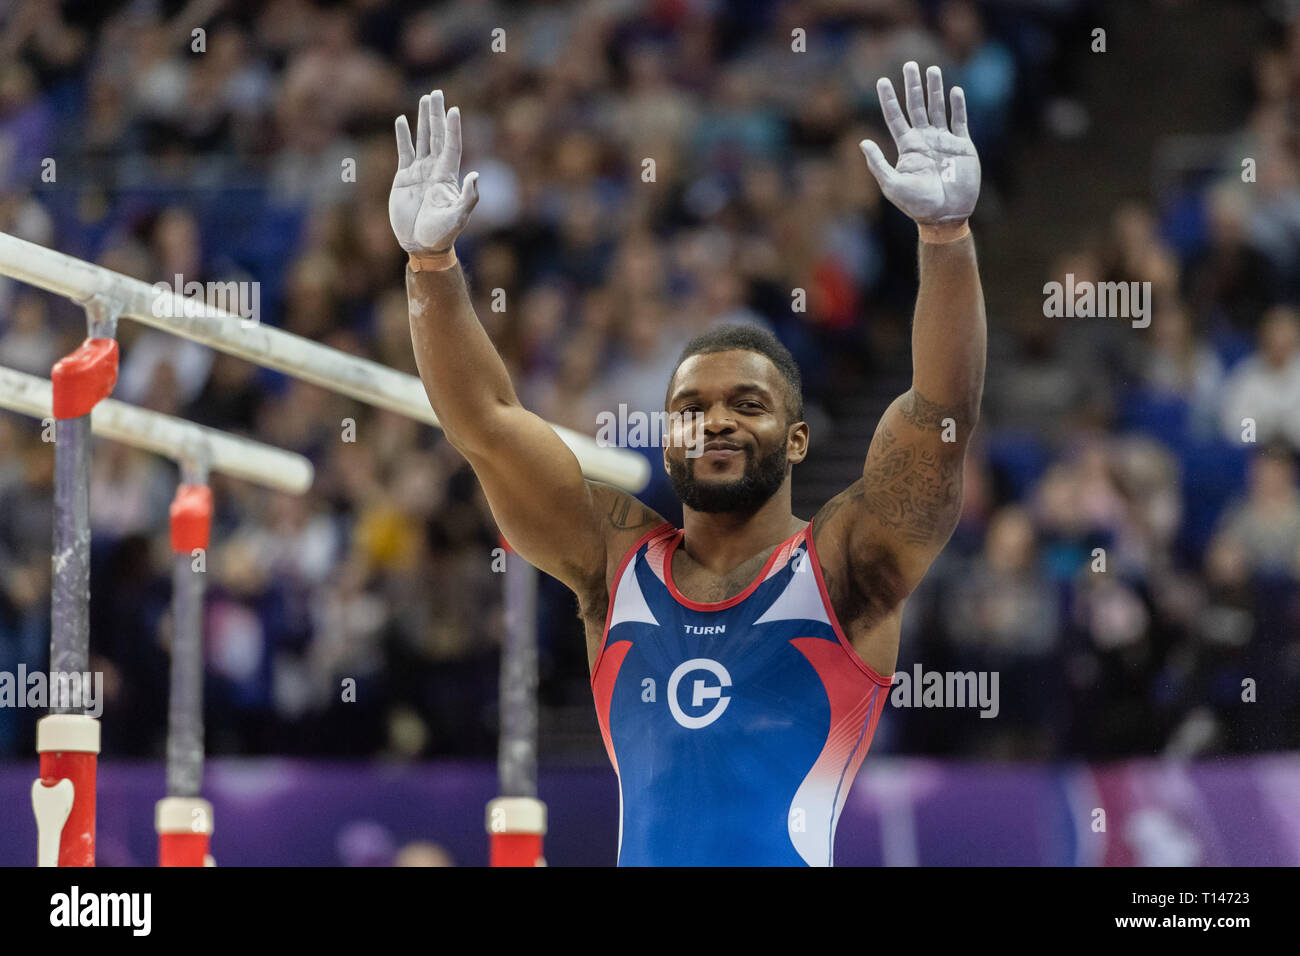 London, UK. 23rd March, 2019. Courtney Tulloch performs on the Parallel Bars during the Matchroom Multisport presents the 2019 Superstars of Gymnastics at The O2 Arena on Saturday, 23 March 2019. LONDON ENGLAND. Credit: Taka G Wu/Alamy News Stock Photo